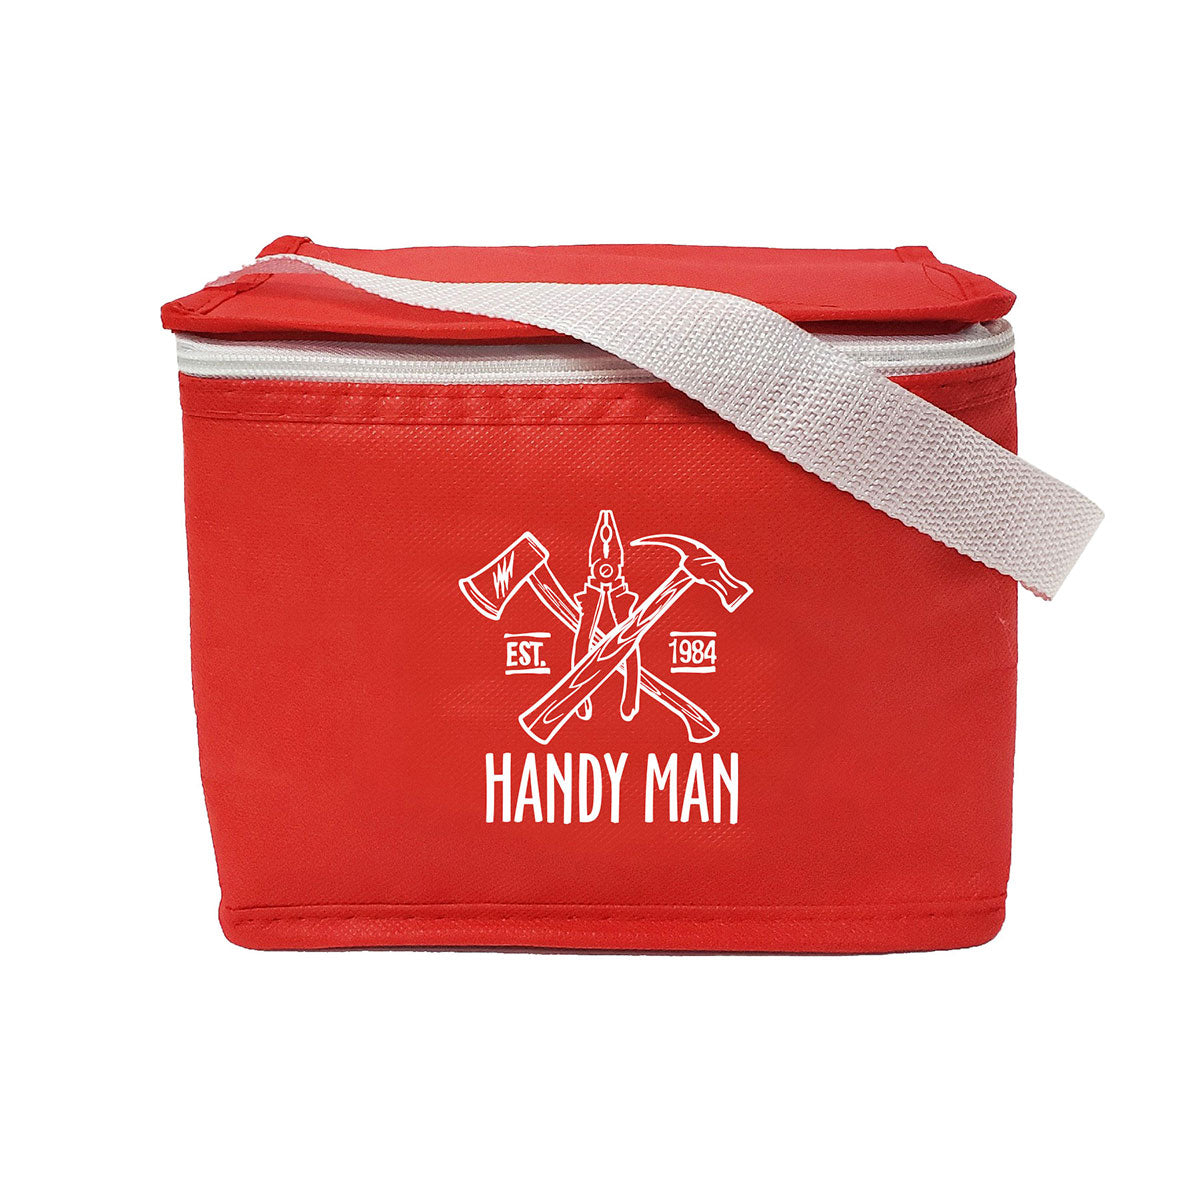 Economy Cooler Lunch Bag